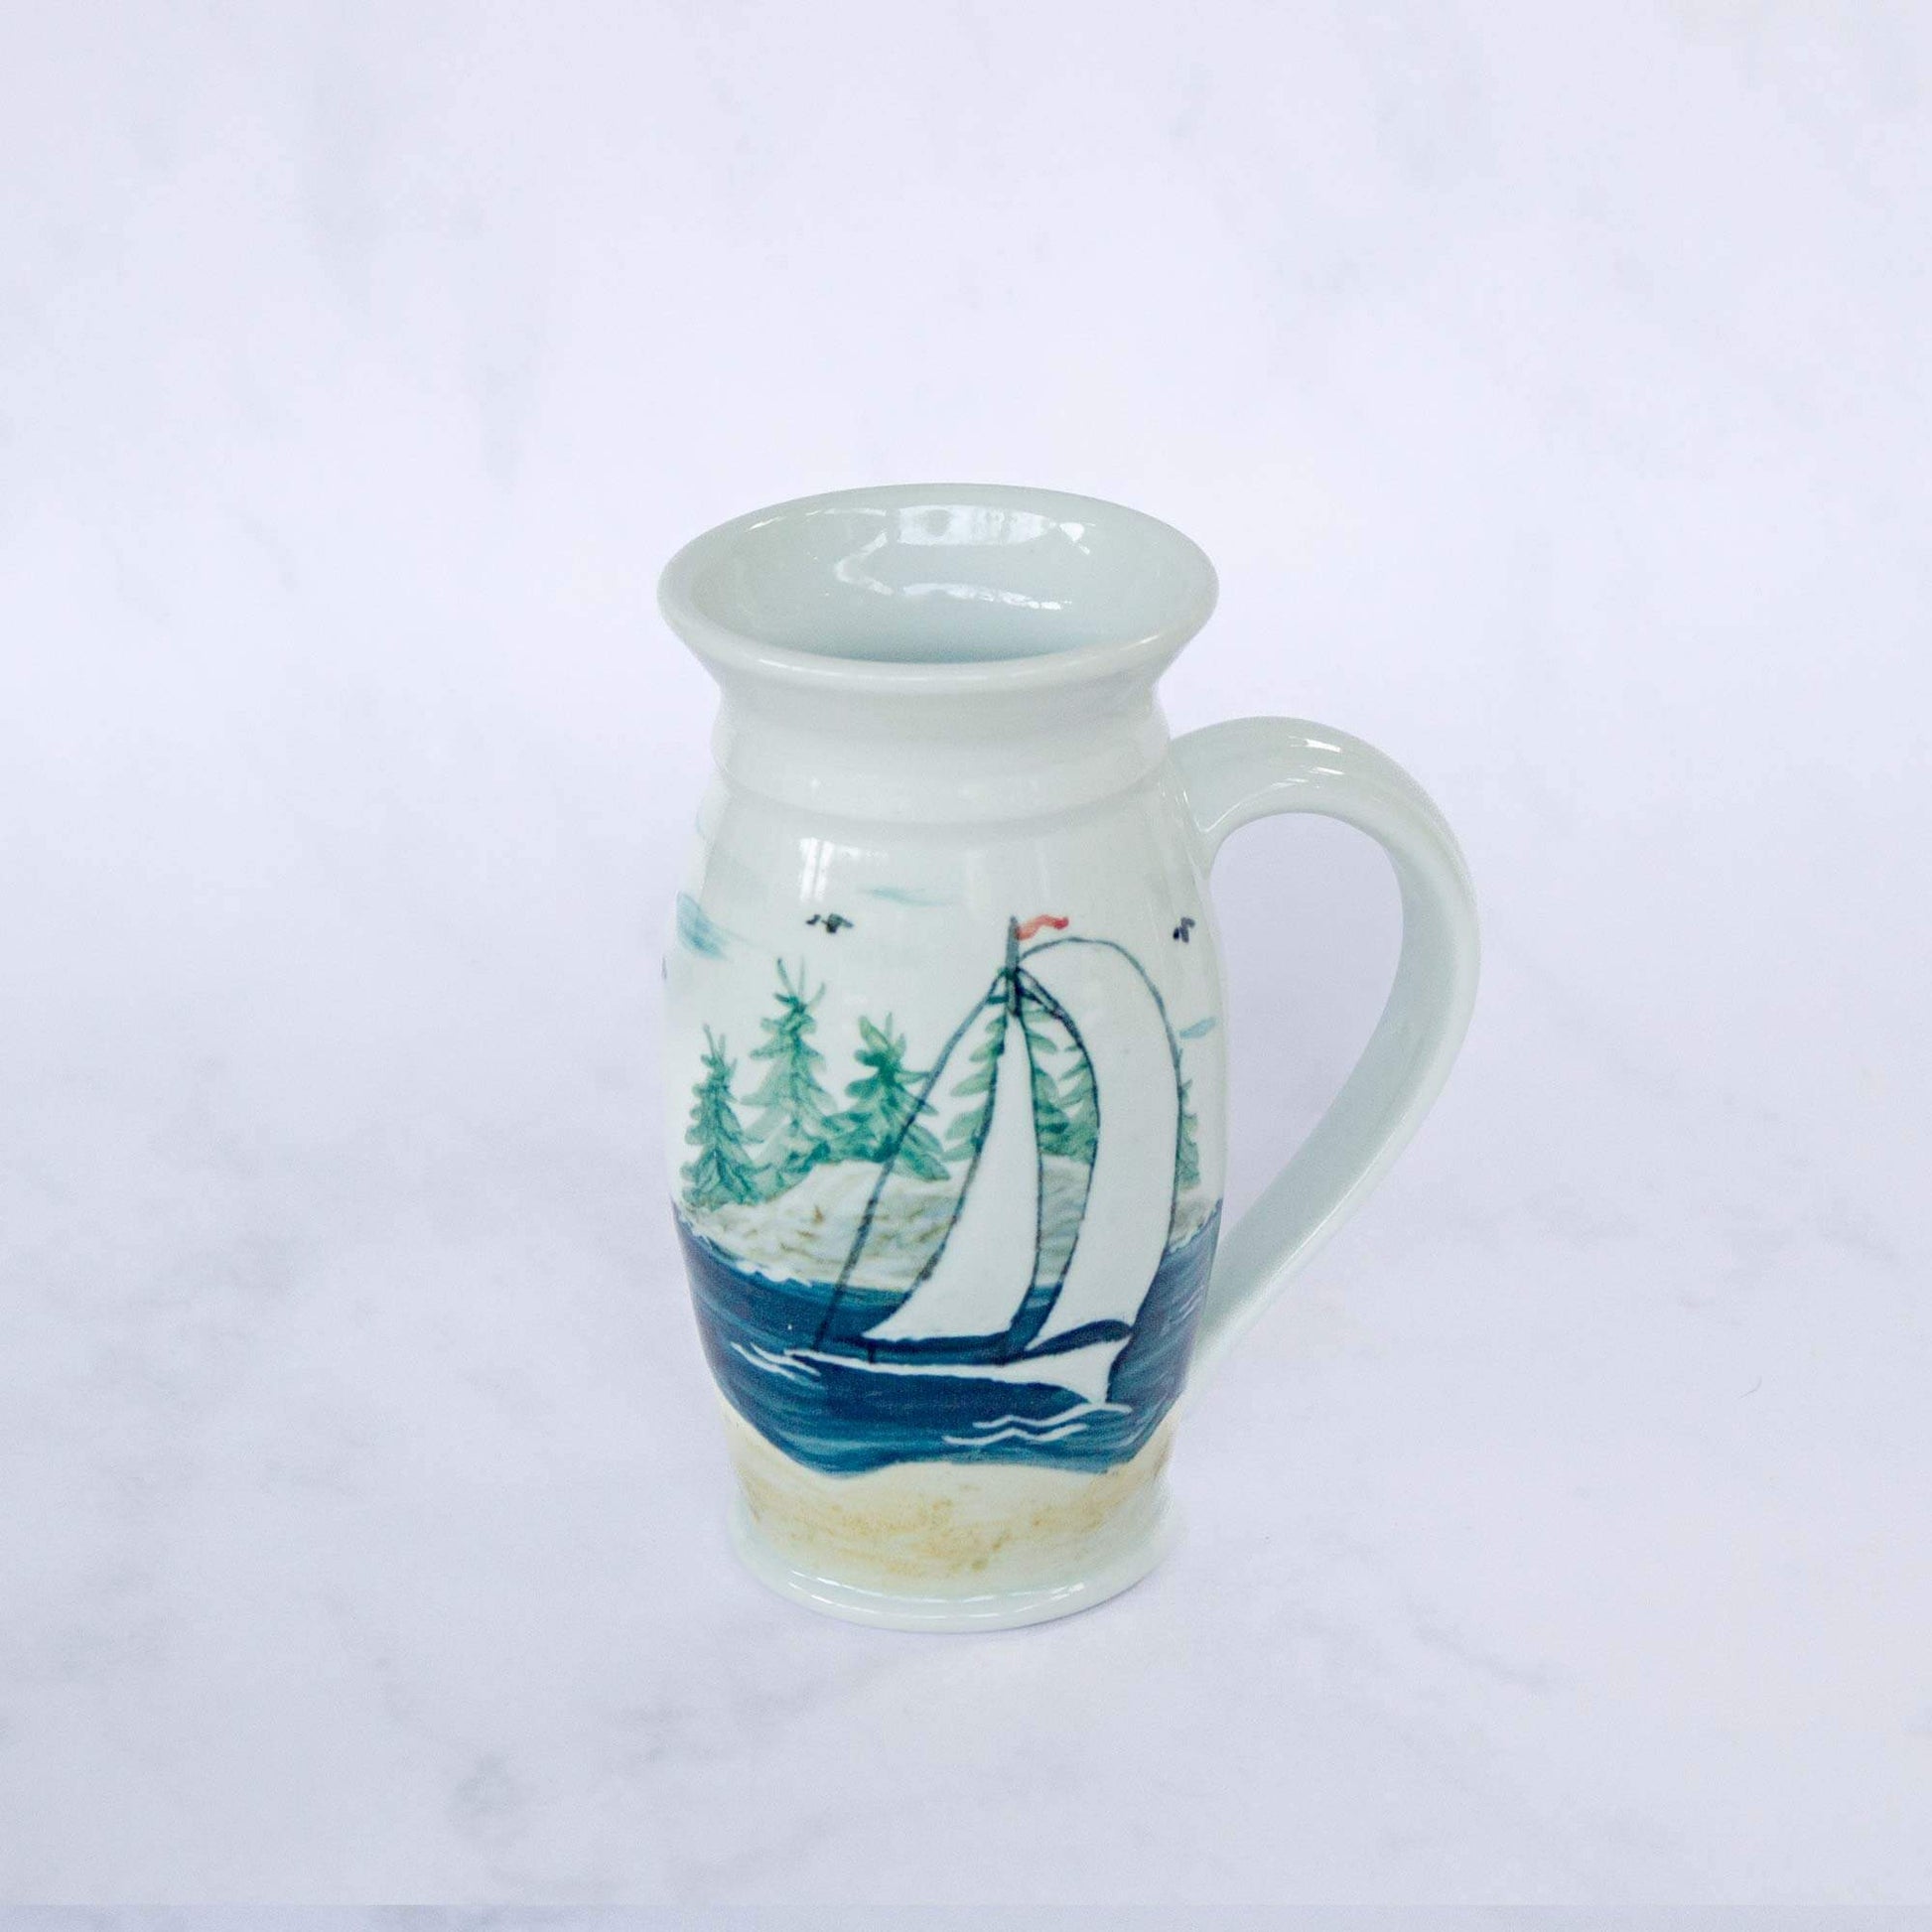 Handmade Pottery Beer Stein in Sailboat pattern made by Georgetown Pottery in Maine